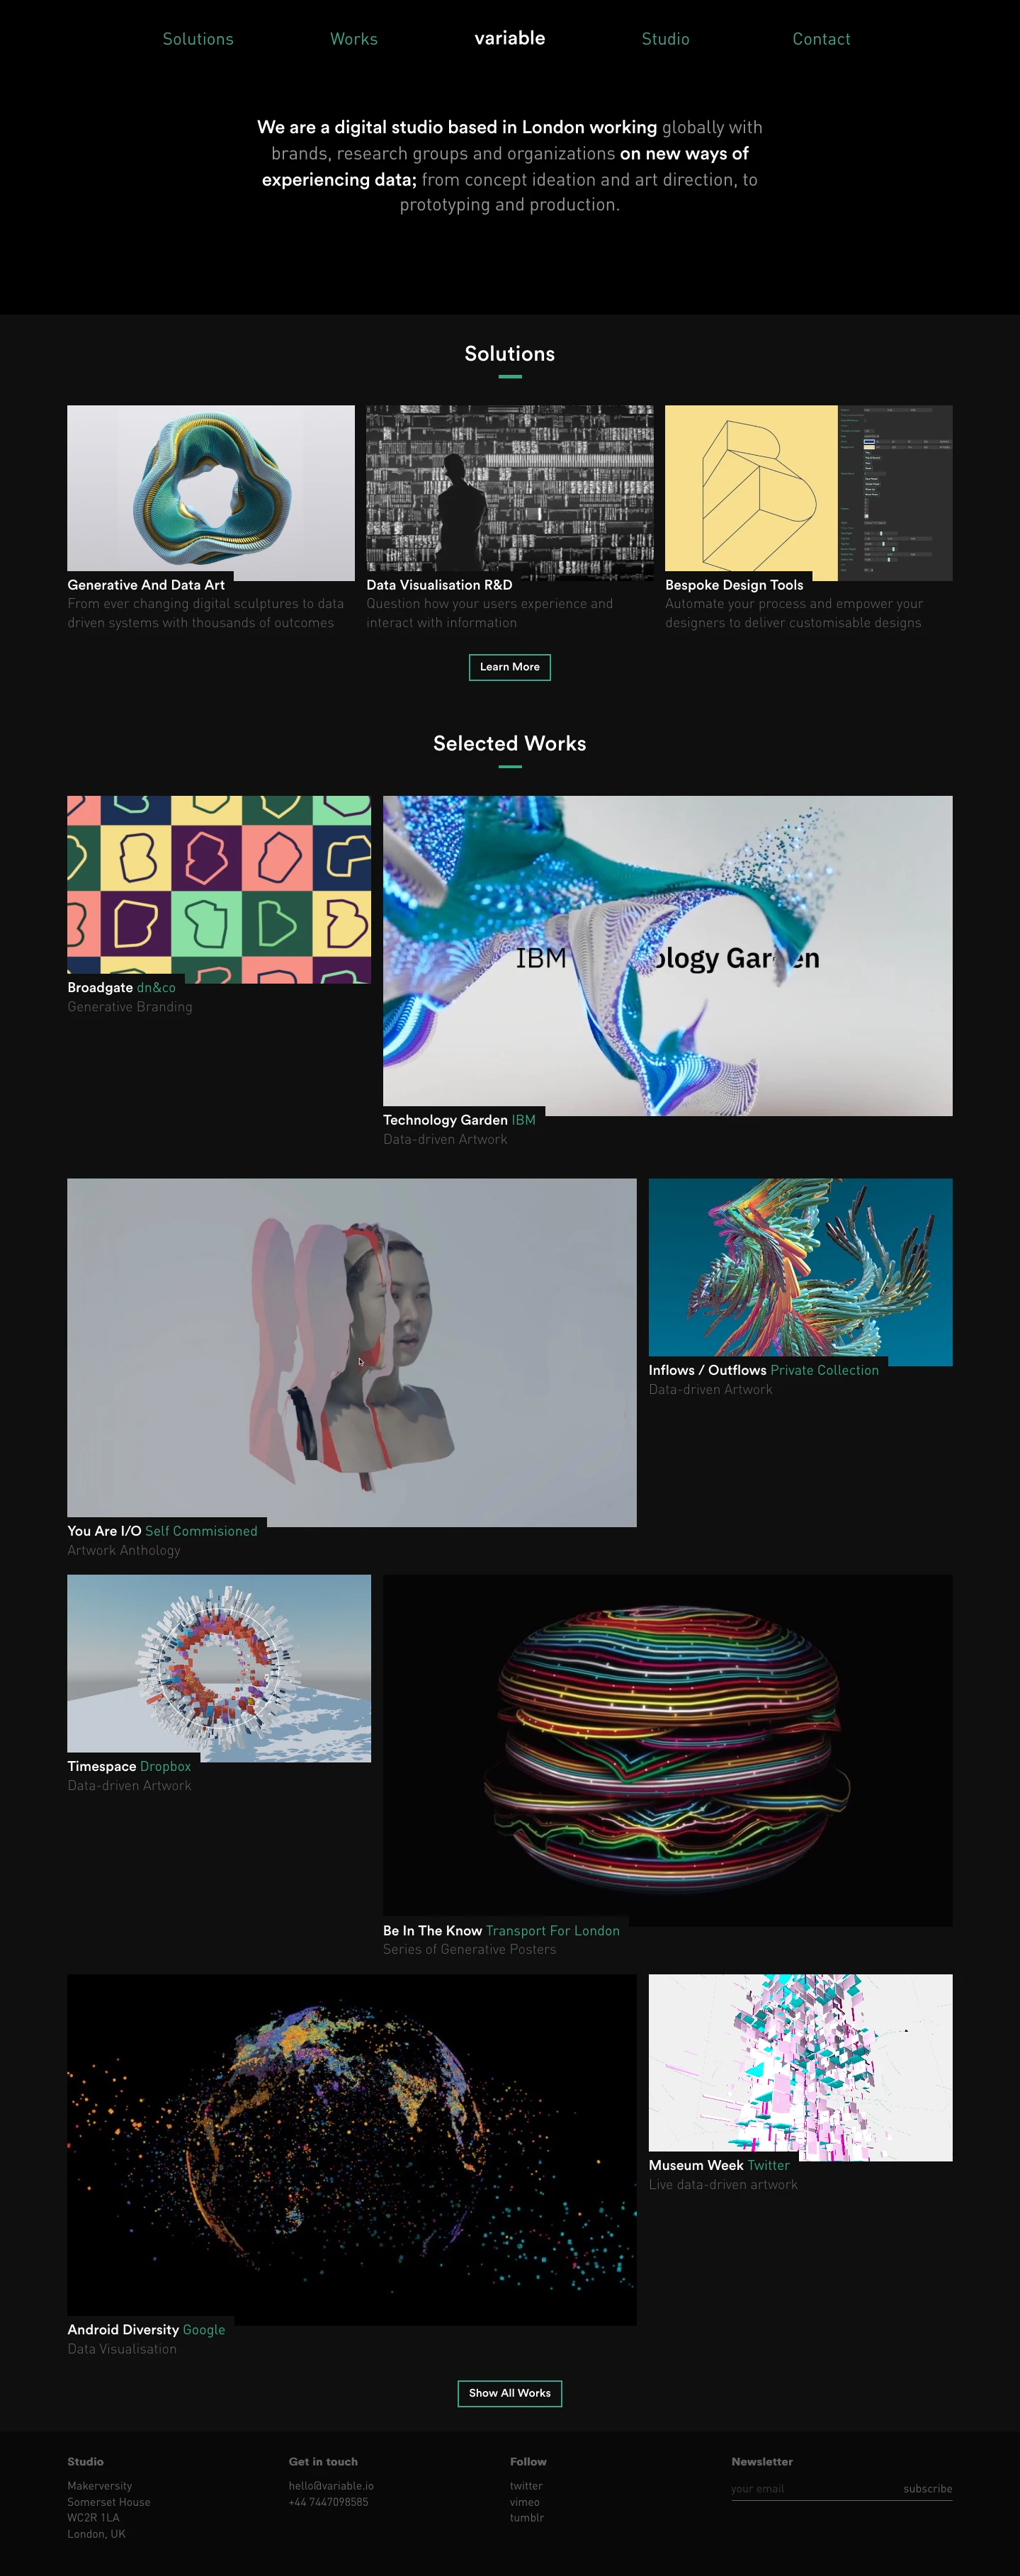 Variable Landing Page Example: Variable is a generative design and data visualisation studio based in London, UK. We blend design, software and aesthetics emerging from data, processes and human behaviour.